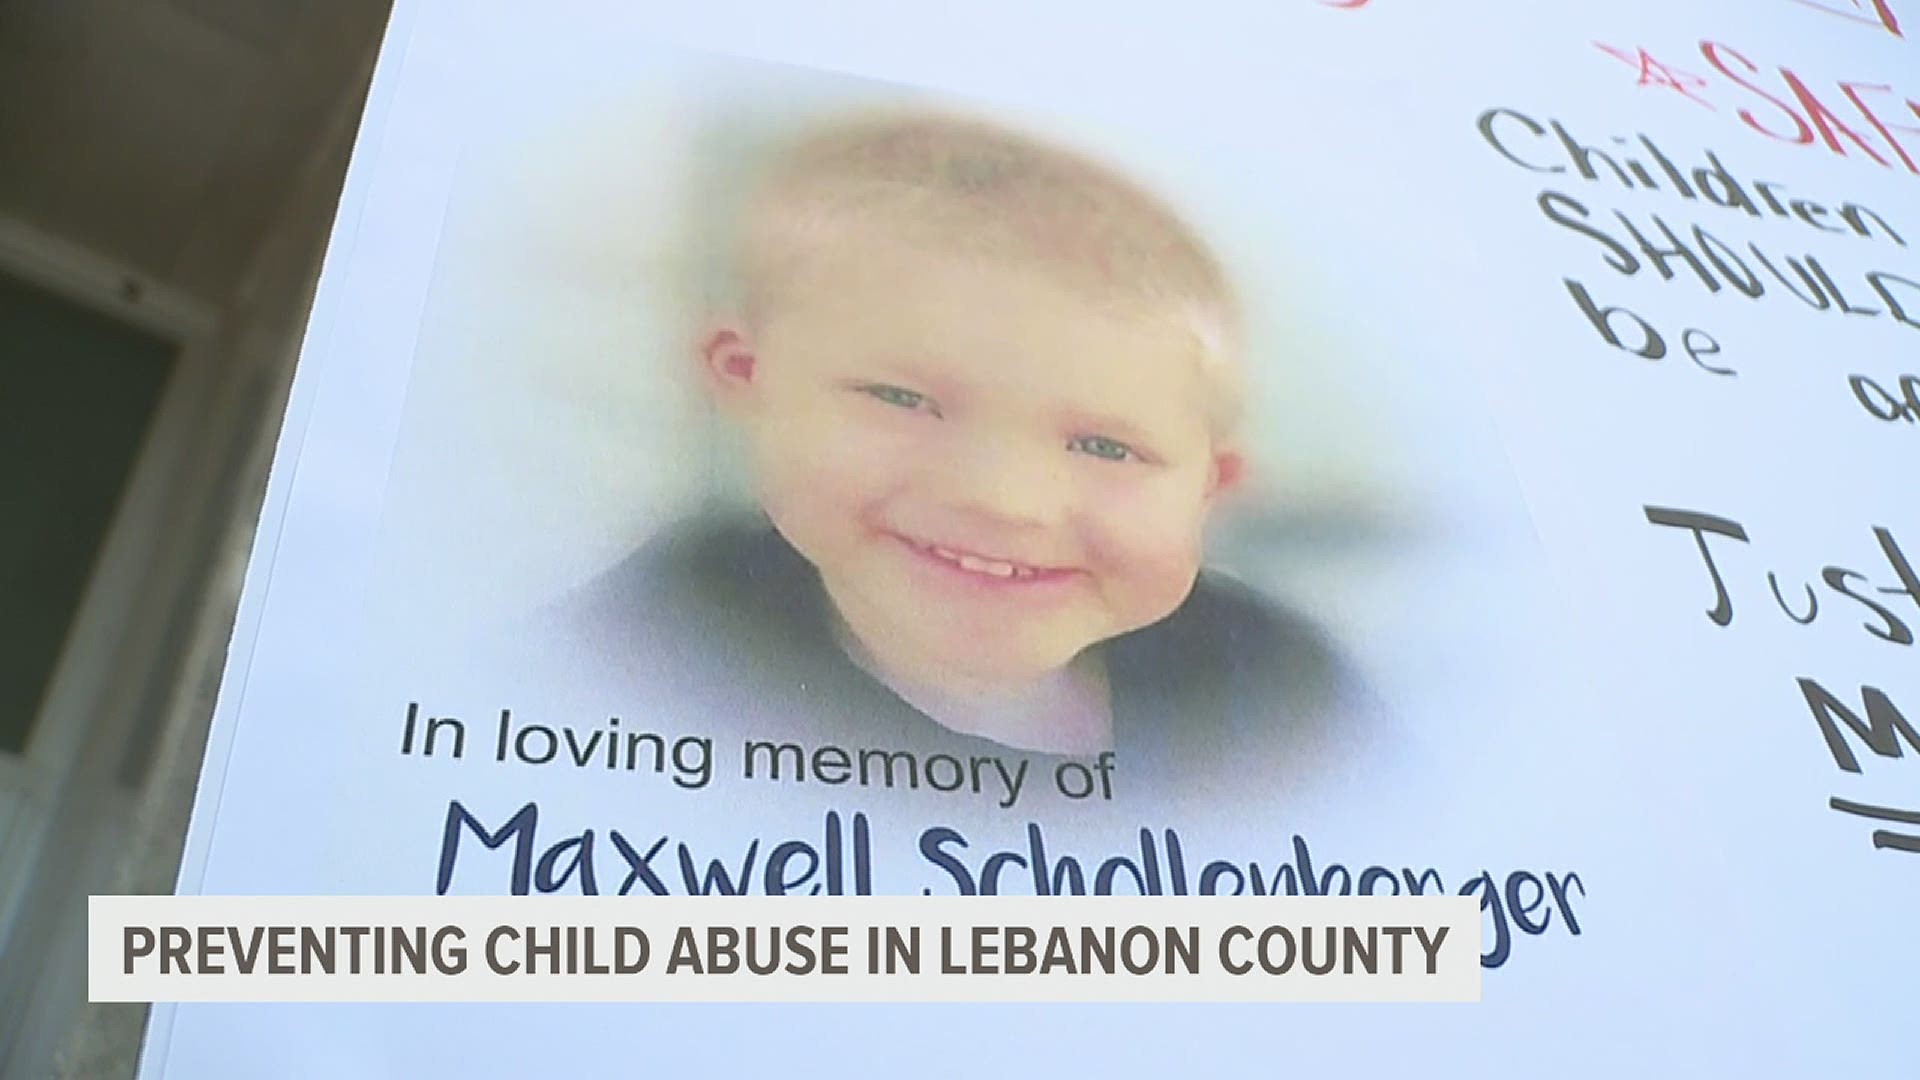 Lebanon County community members hypervigilant to child abuse after two high-profile cases, working to prevent it